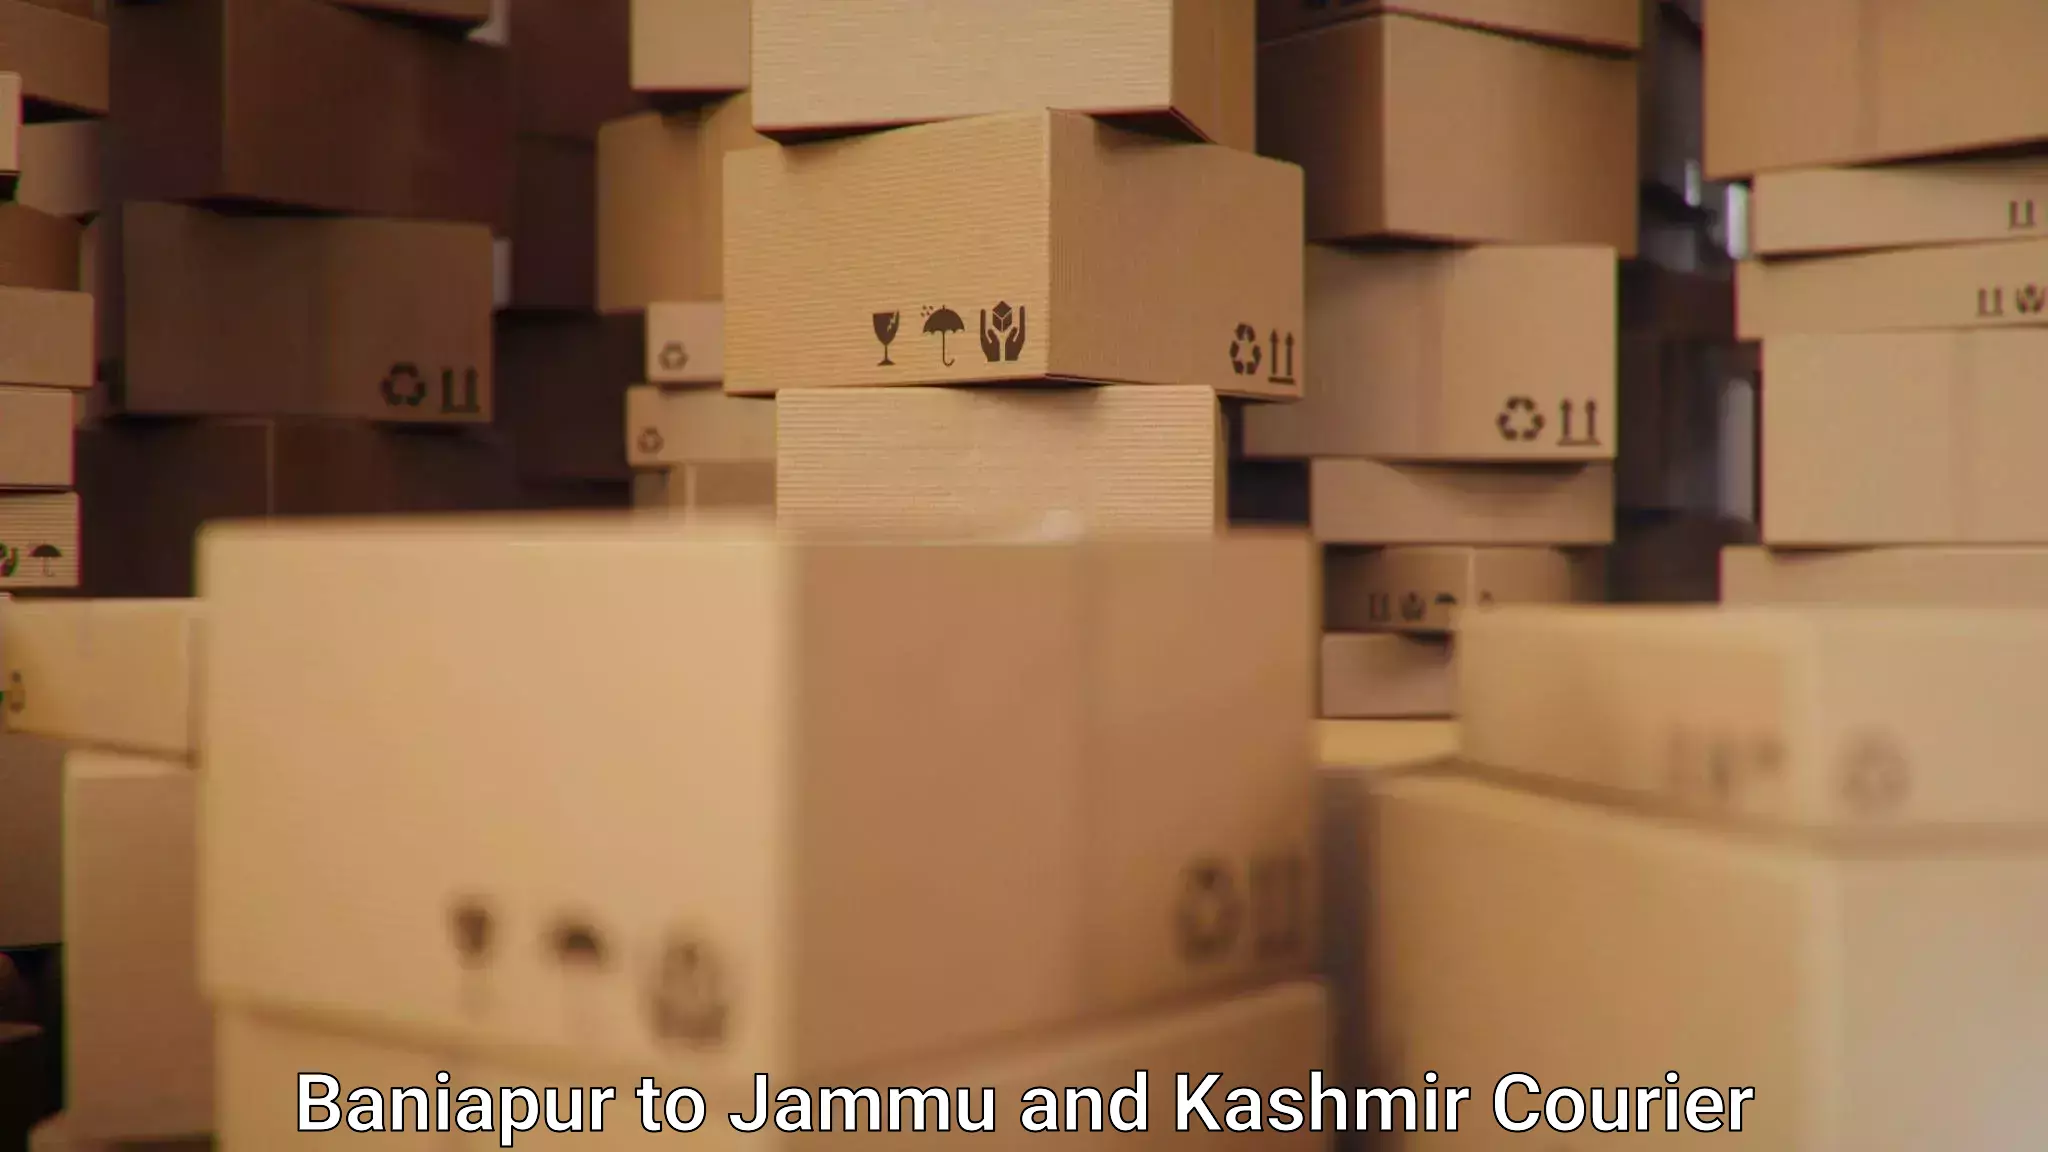 Parcel delivery automation Baniapur to Baramulla